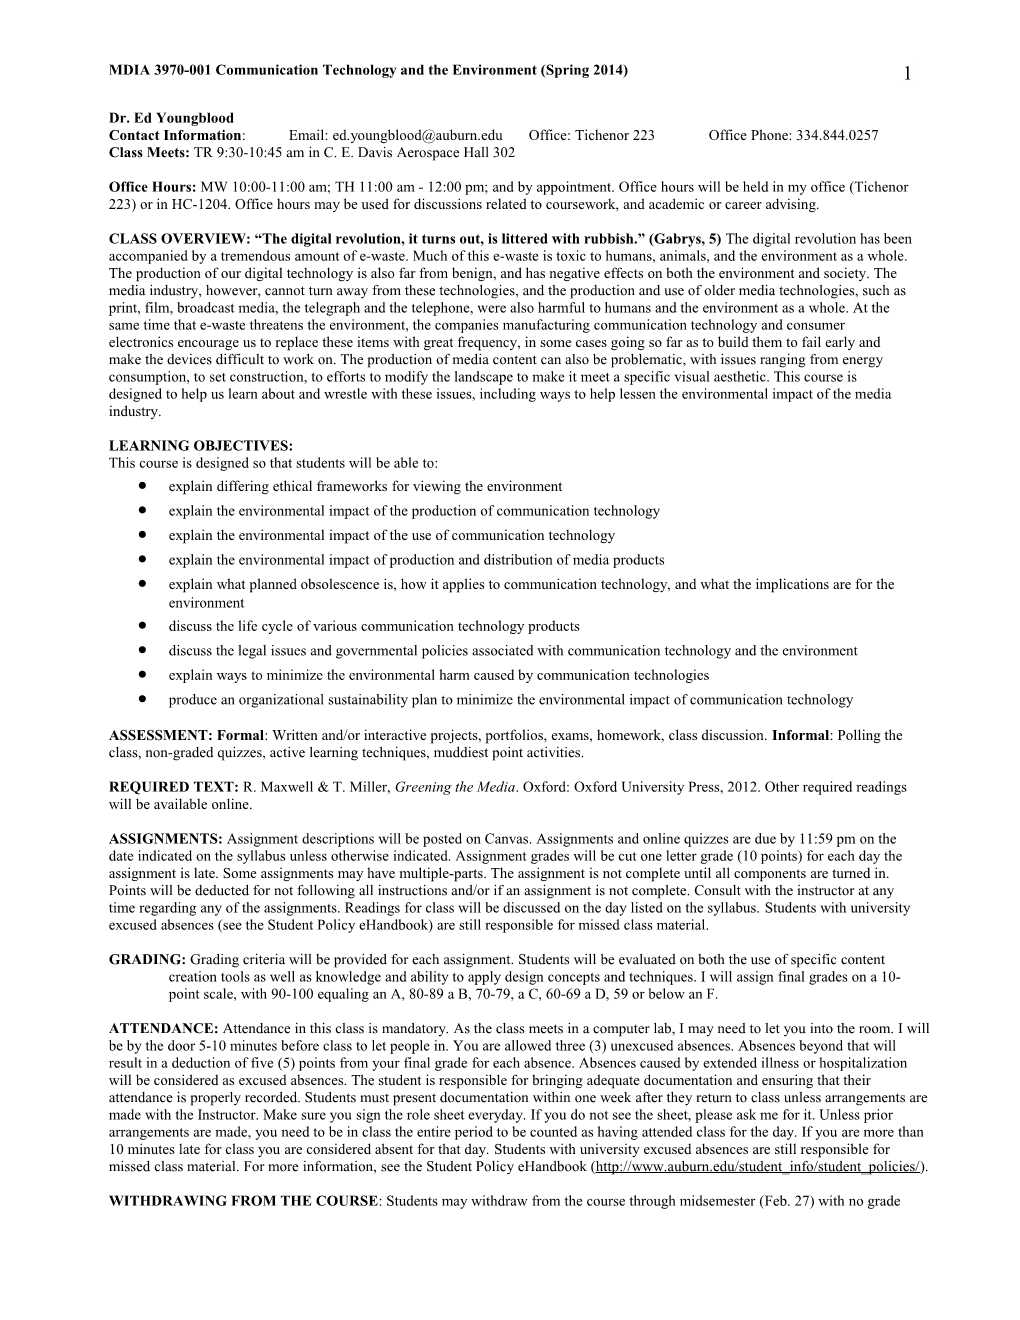 MDIA 3970-001Communication Technology and the Environment (Spring 2014)